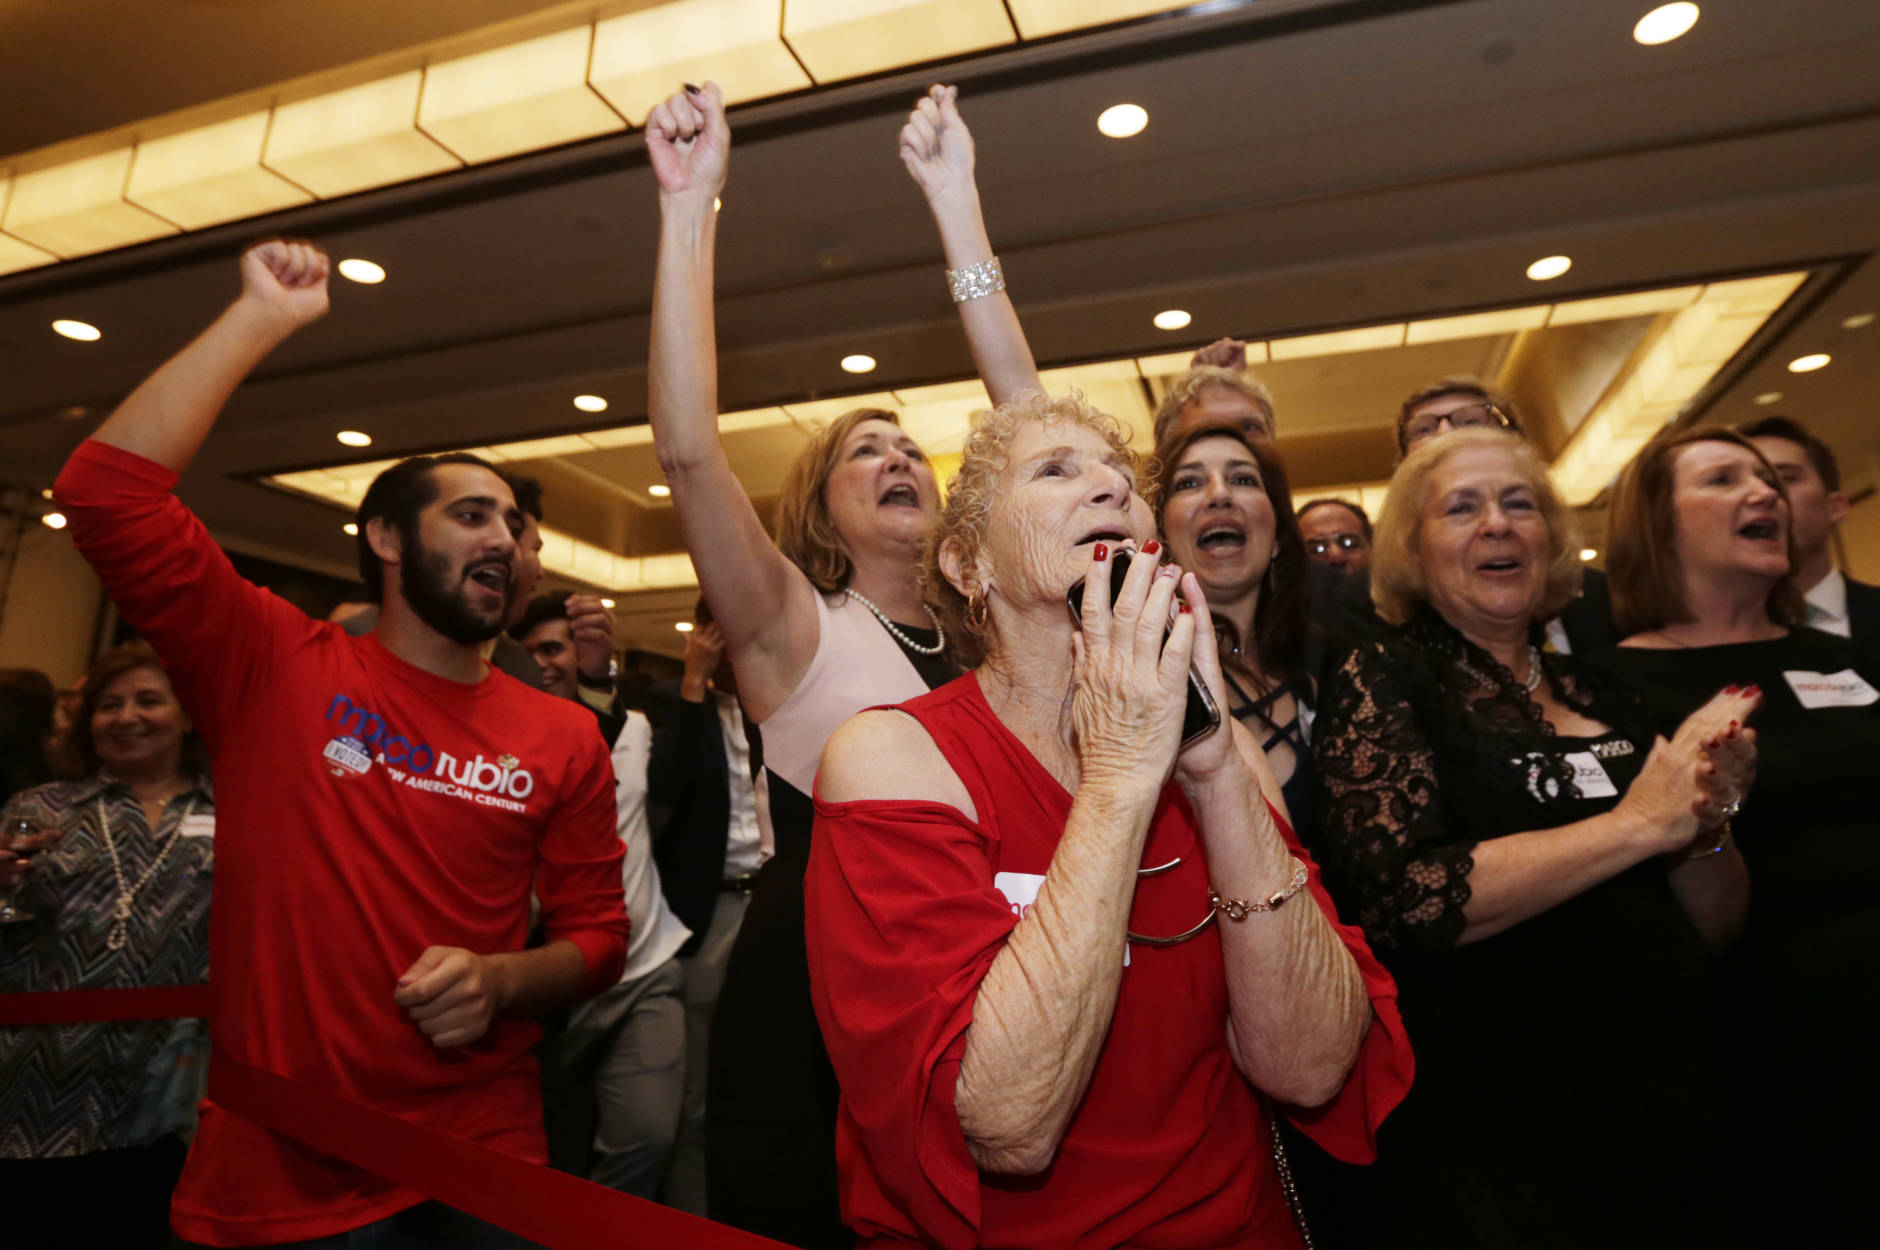 Supporters cheer as news outlets show Sen. Marco Rubio won a second term in Miami, Tuesday Nov. 8, 2016. Rubio defeated U.S. Rep. Patrick Murphy, a two-term congressman. (AP Photo/Wilfredo Lee)